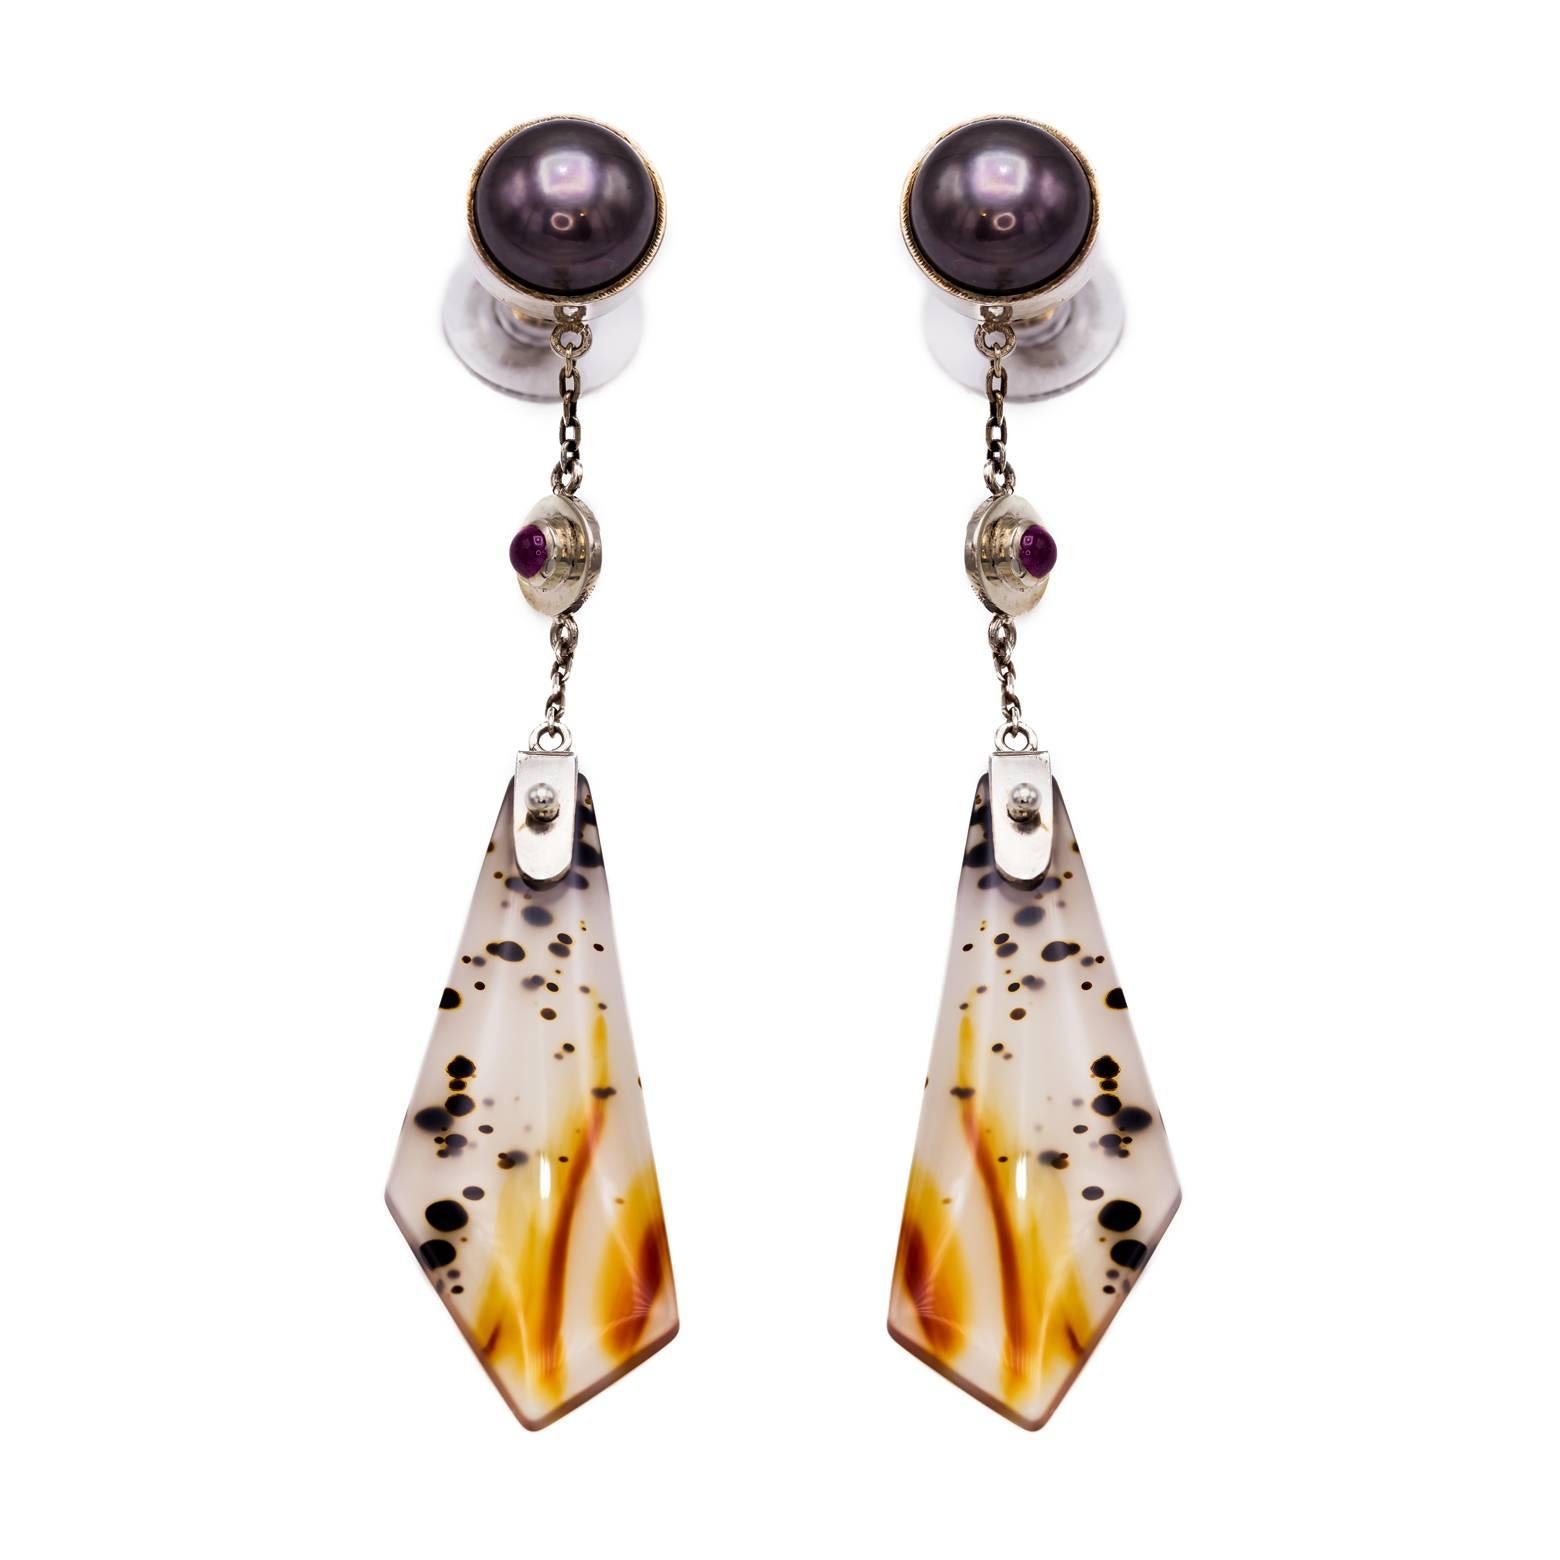 Elegant and fierce almost like an animal print of leopard and zebra together, these organic and angular earrings are a show stopper. Black Tahitian Pearl followed by bright rubies and then gorgeous Montana Agate, you can see the color all the way